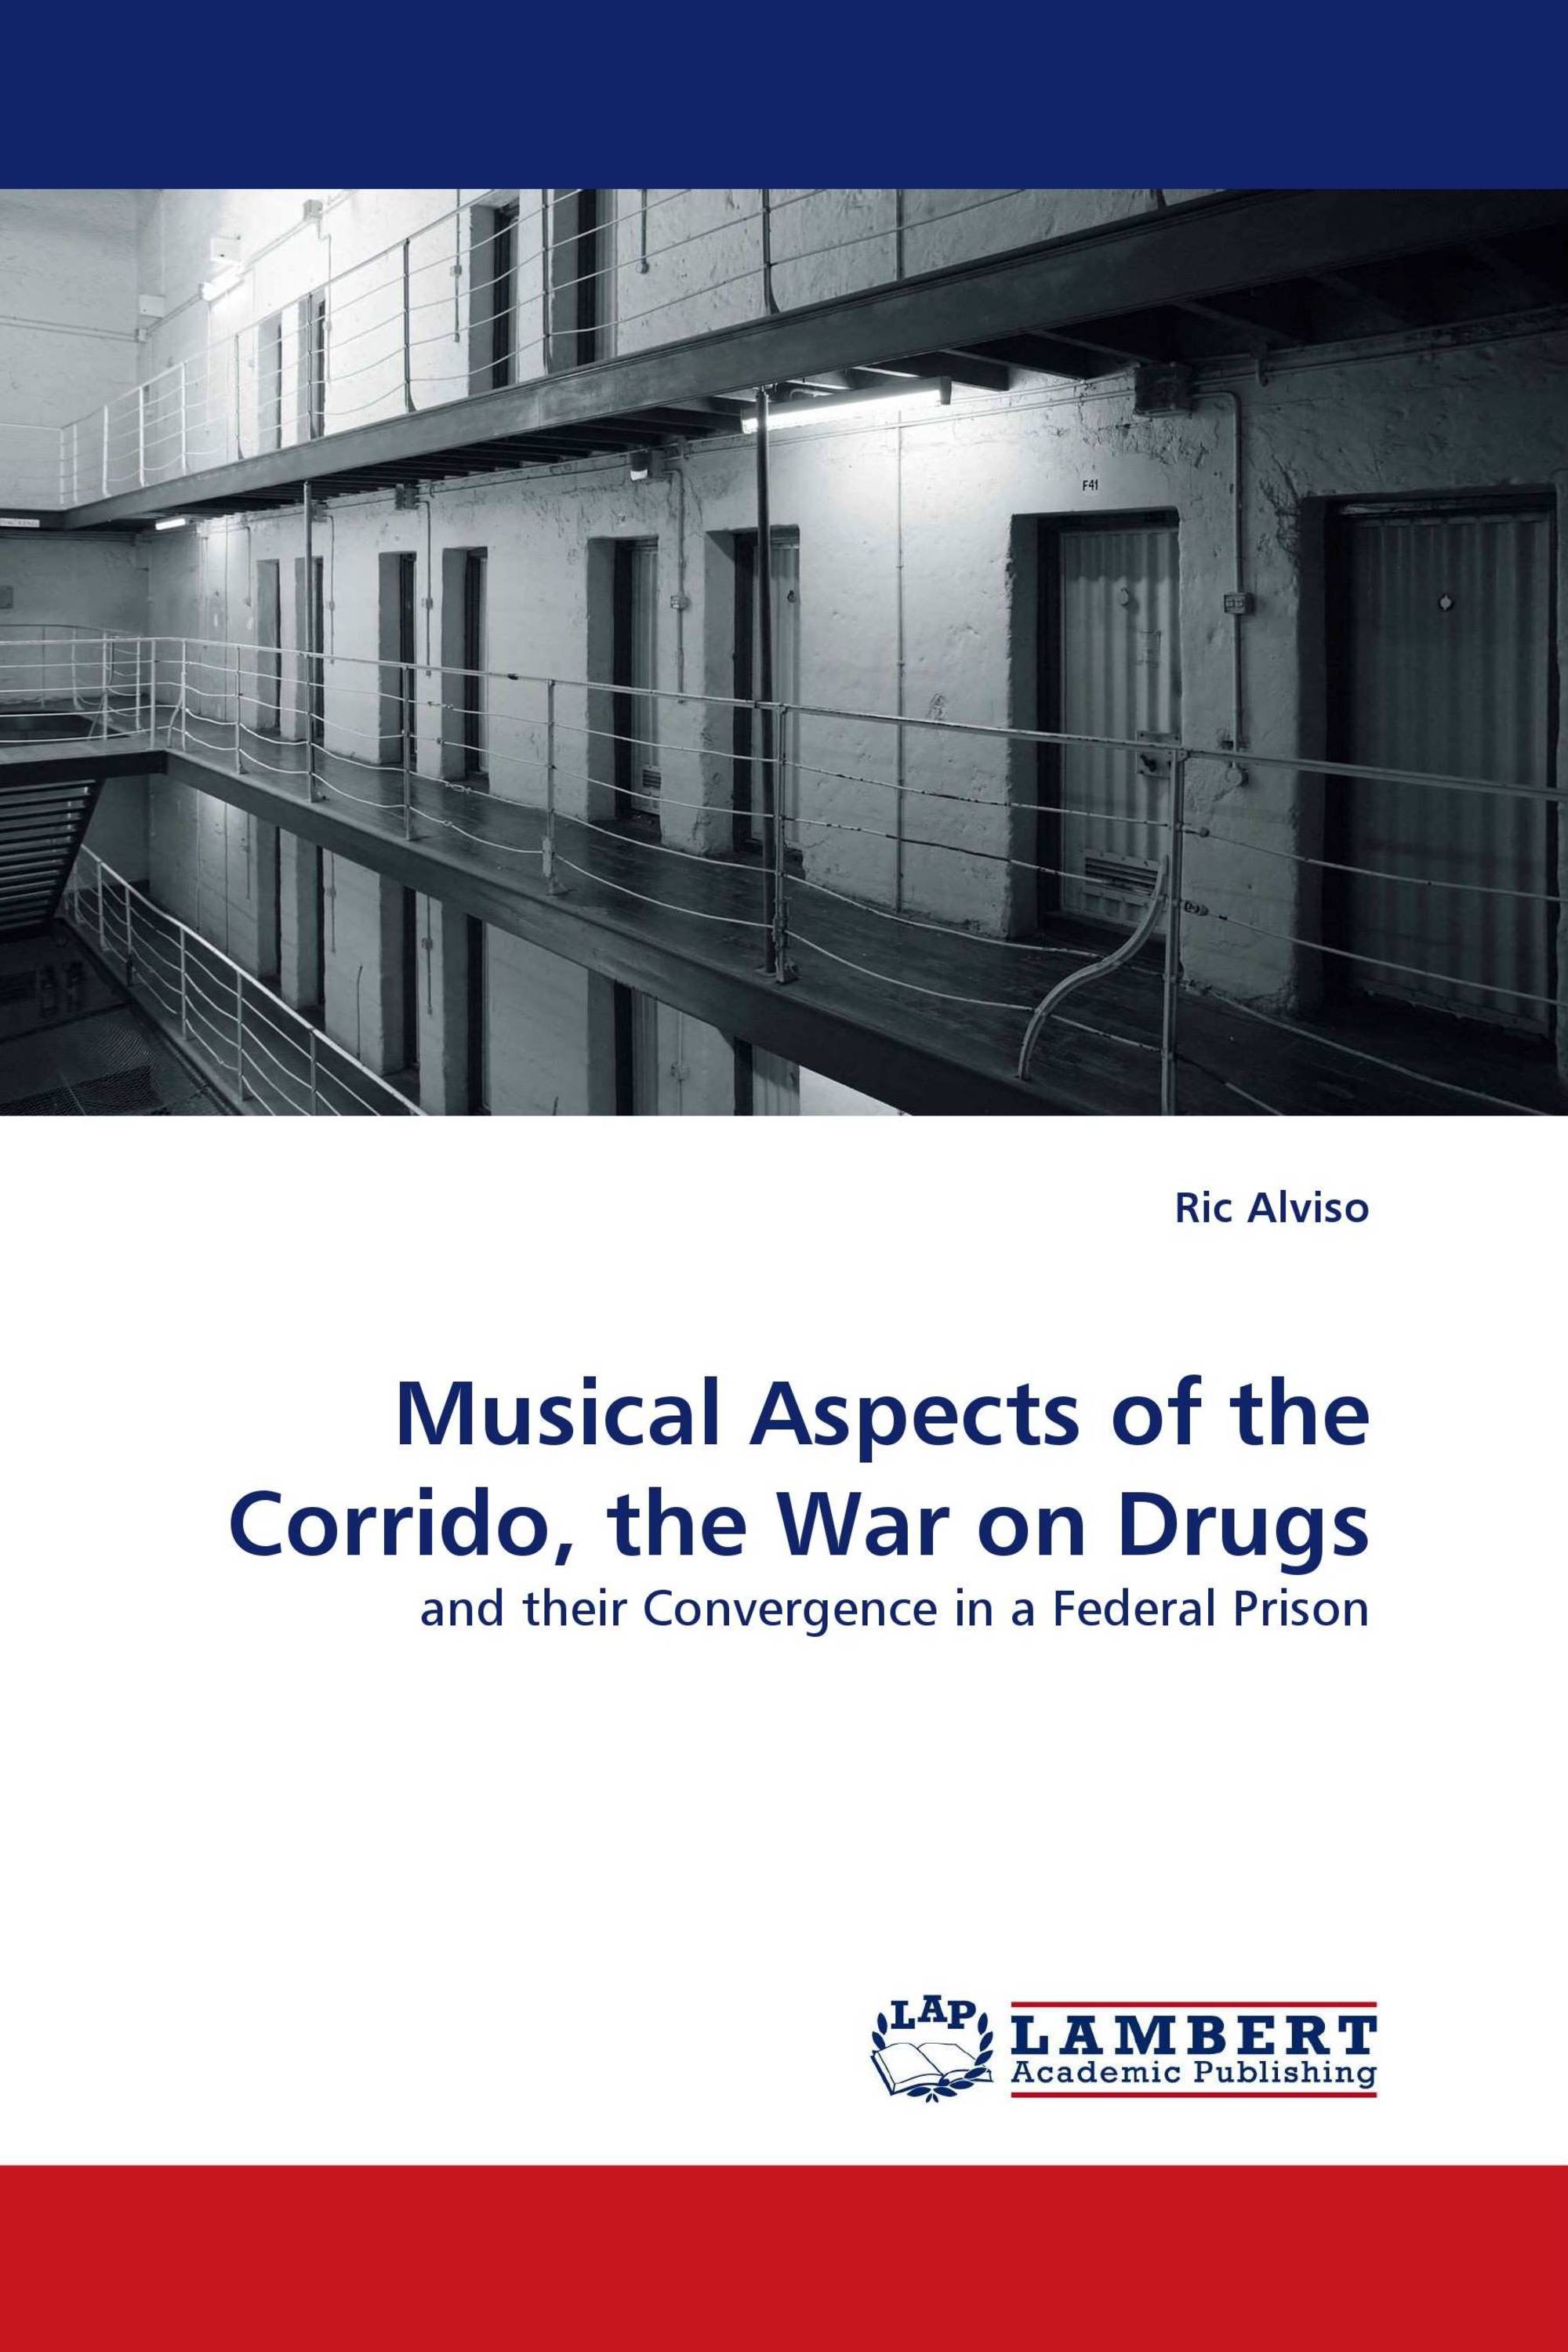 Musical Aspects of the Corrido, the War on Drugs